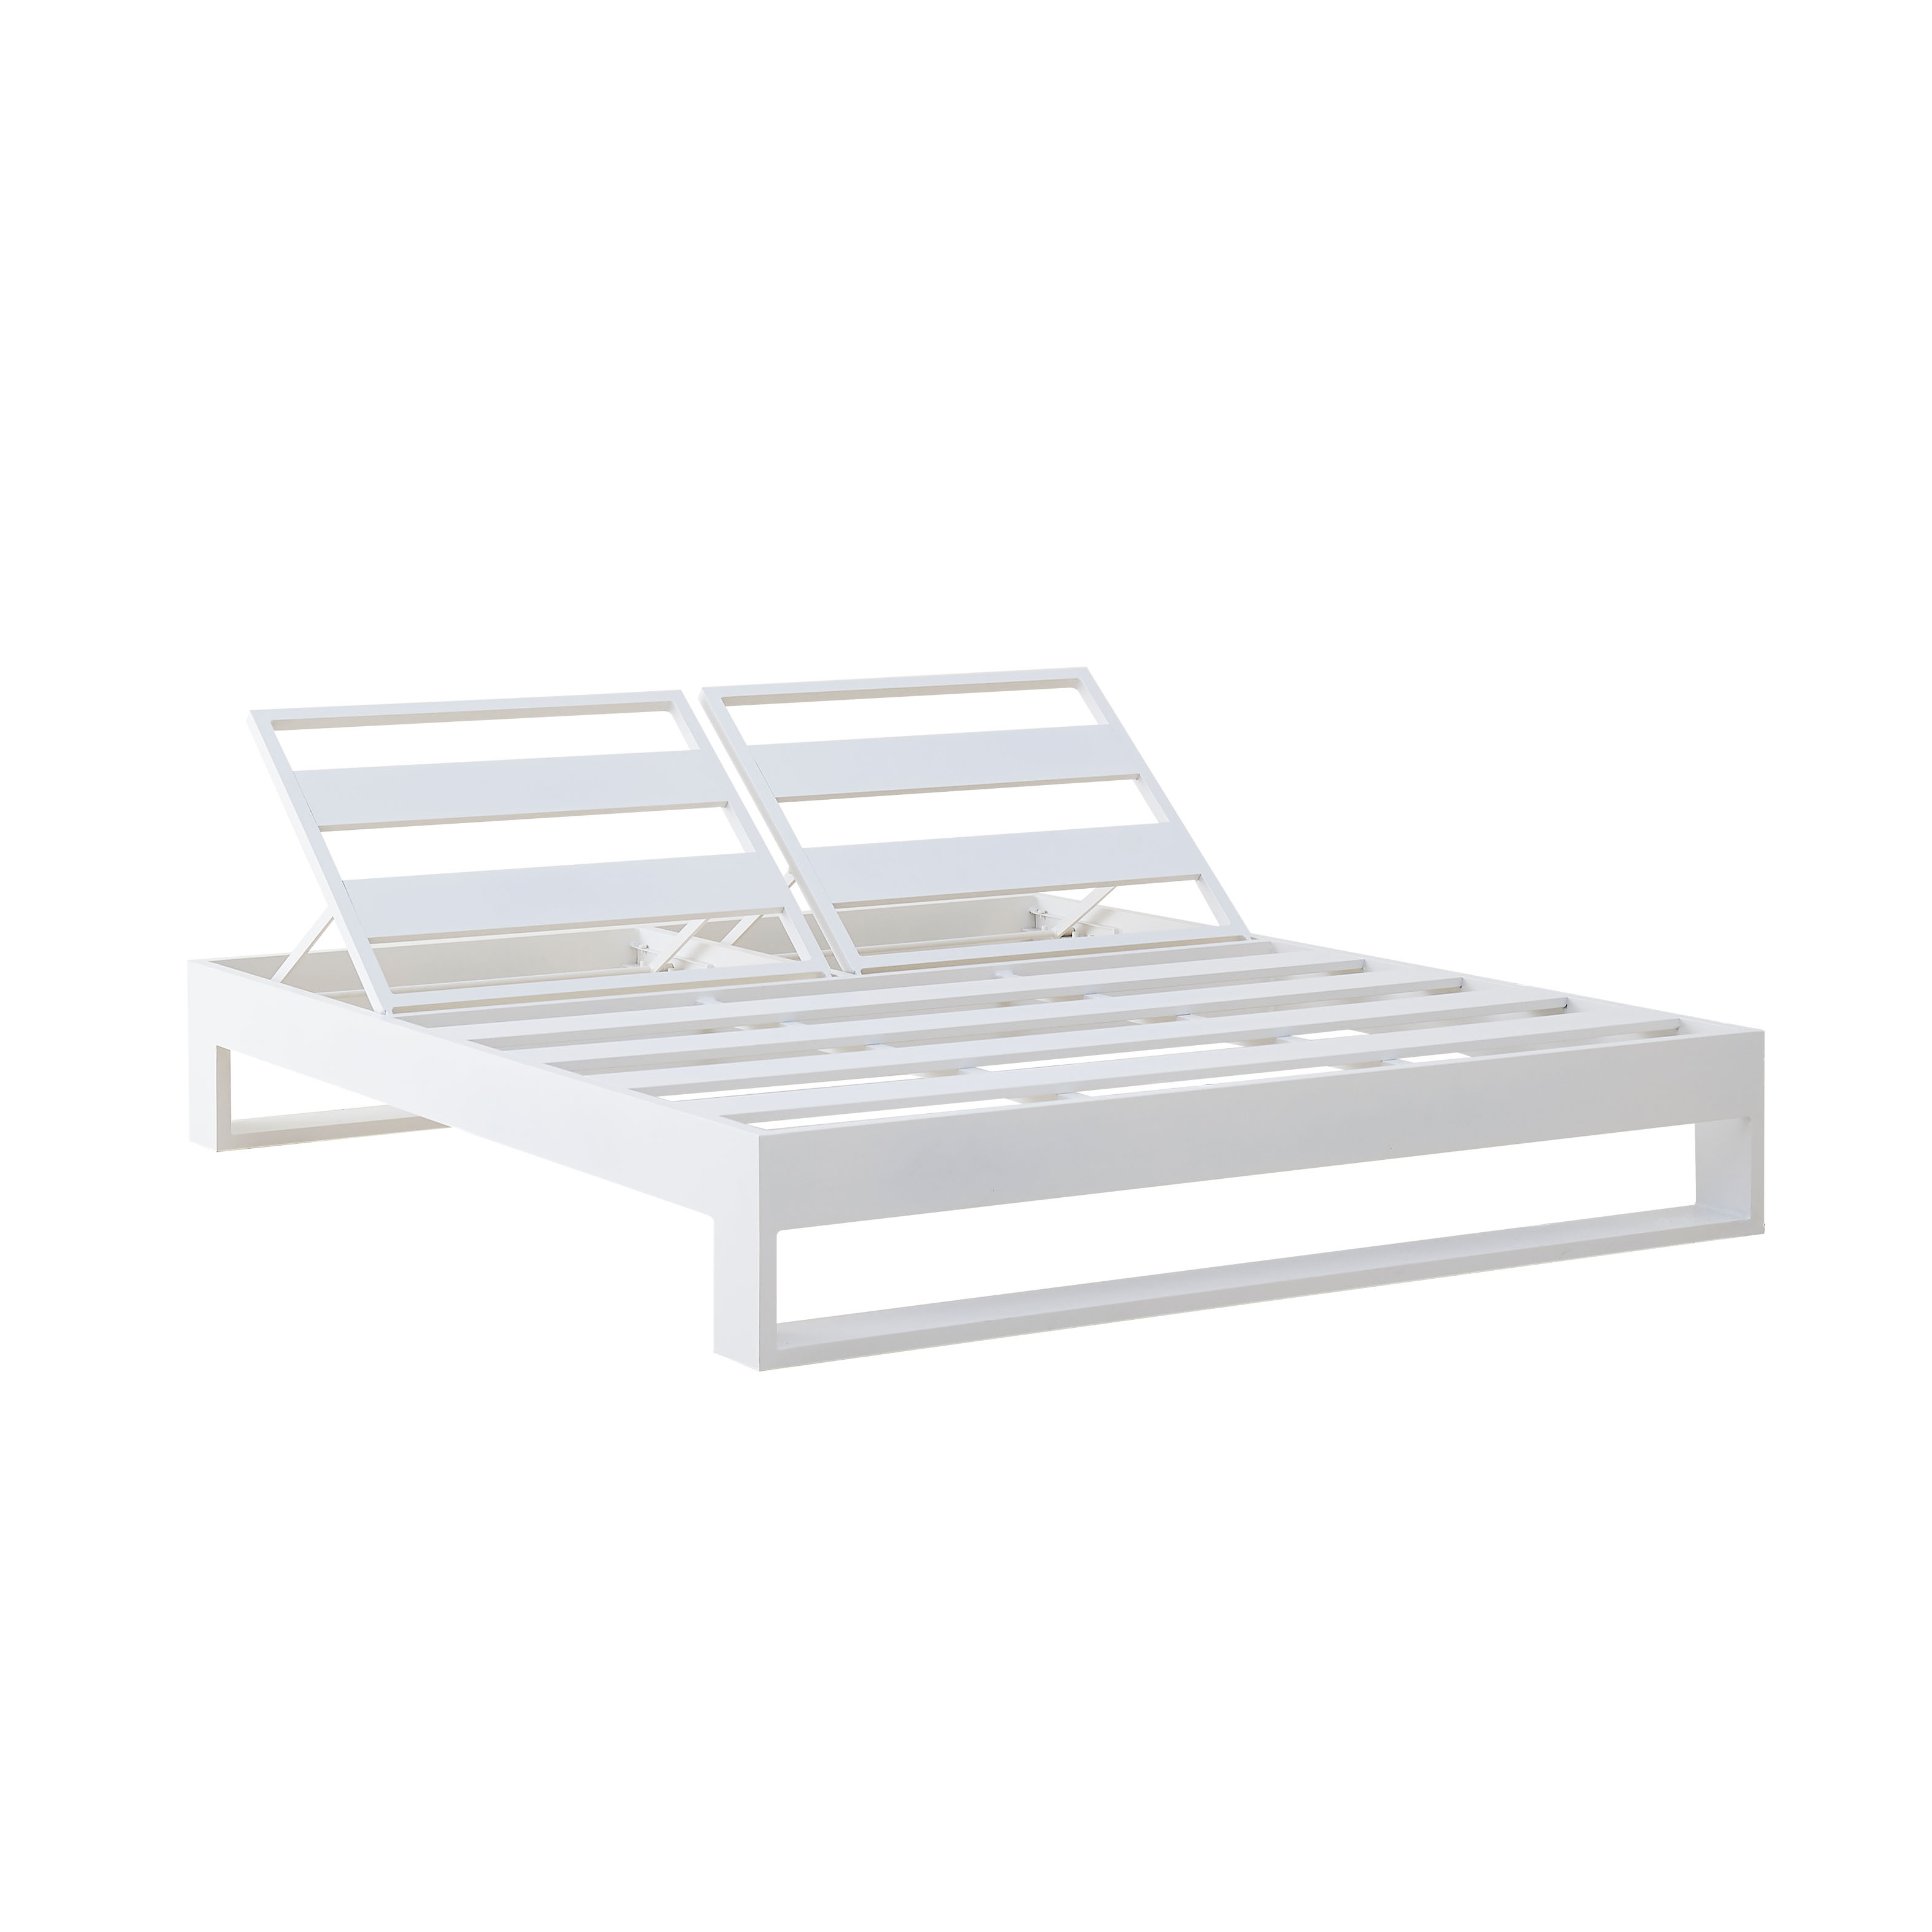 Golf duebel daybed S5